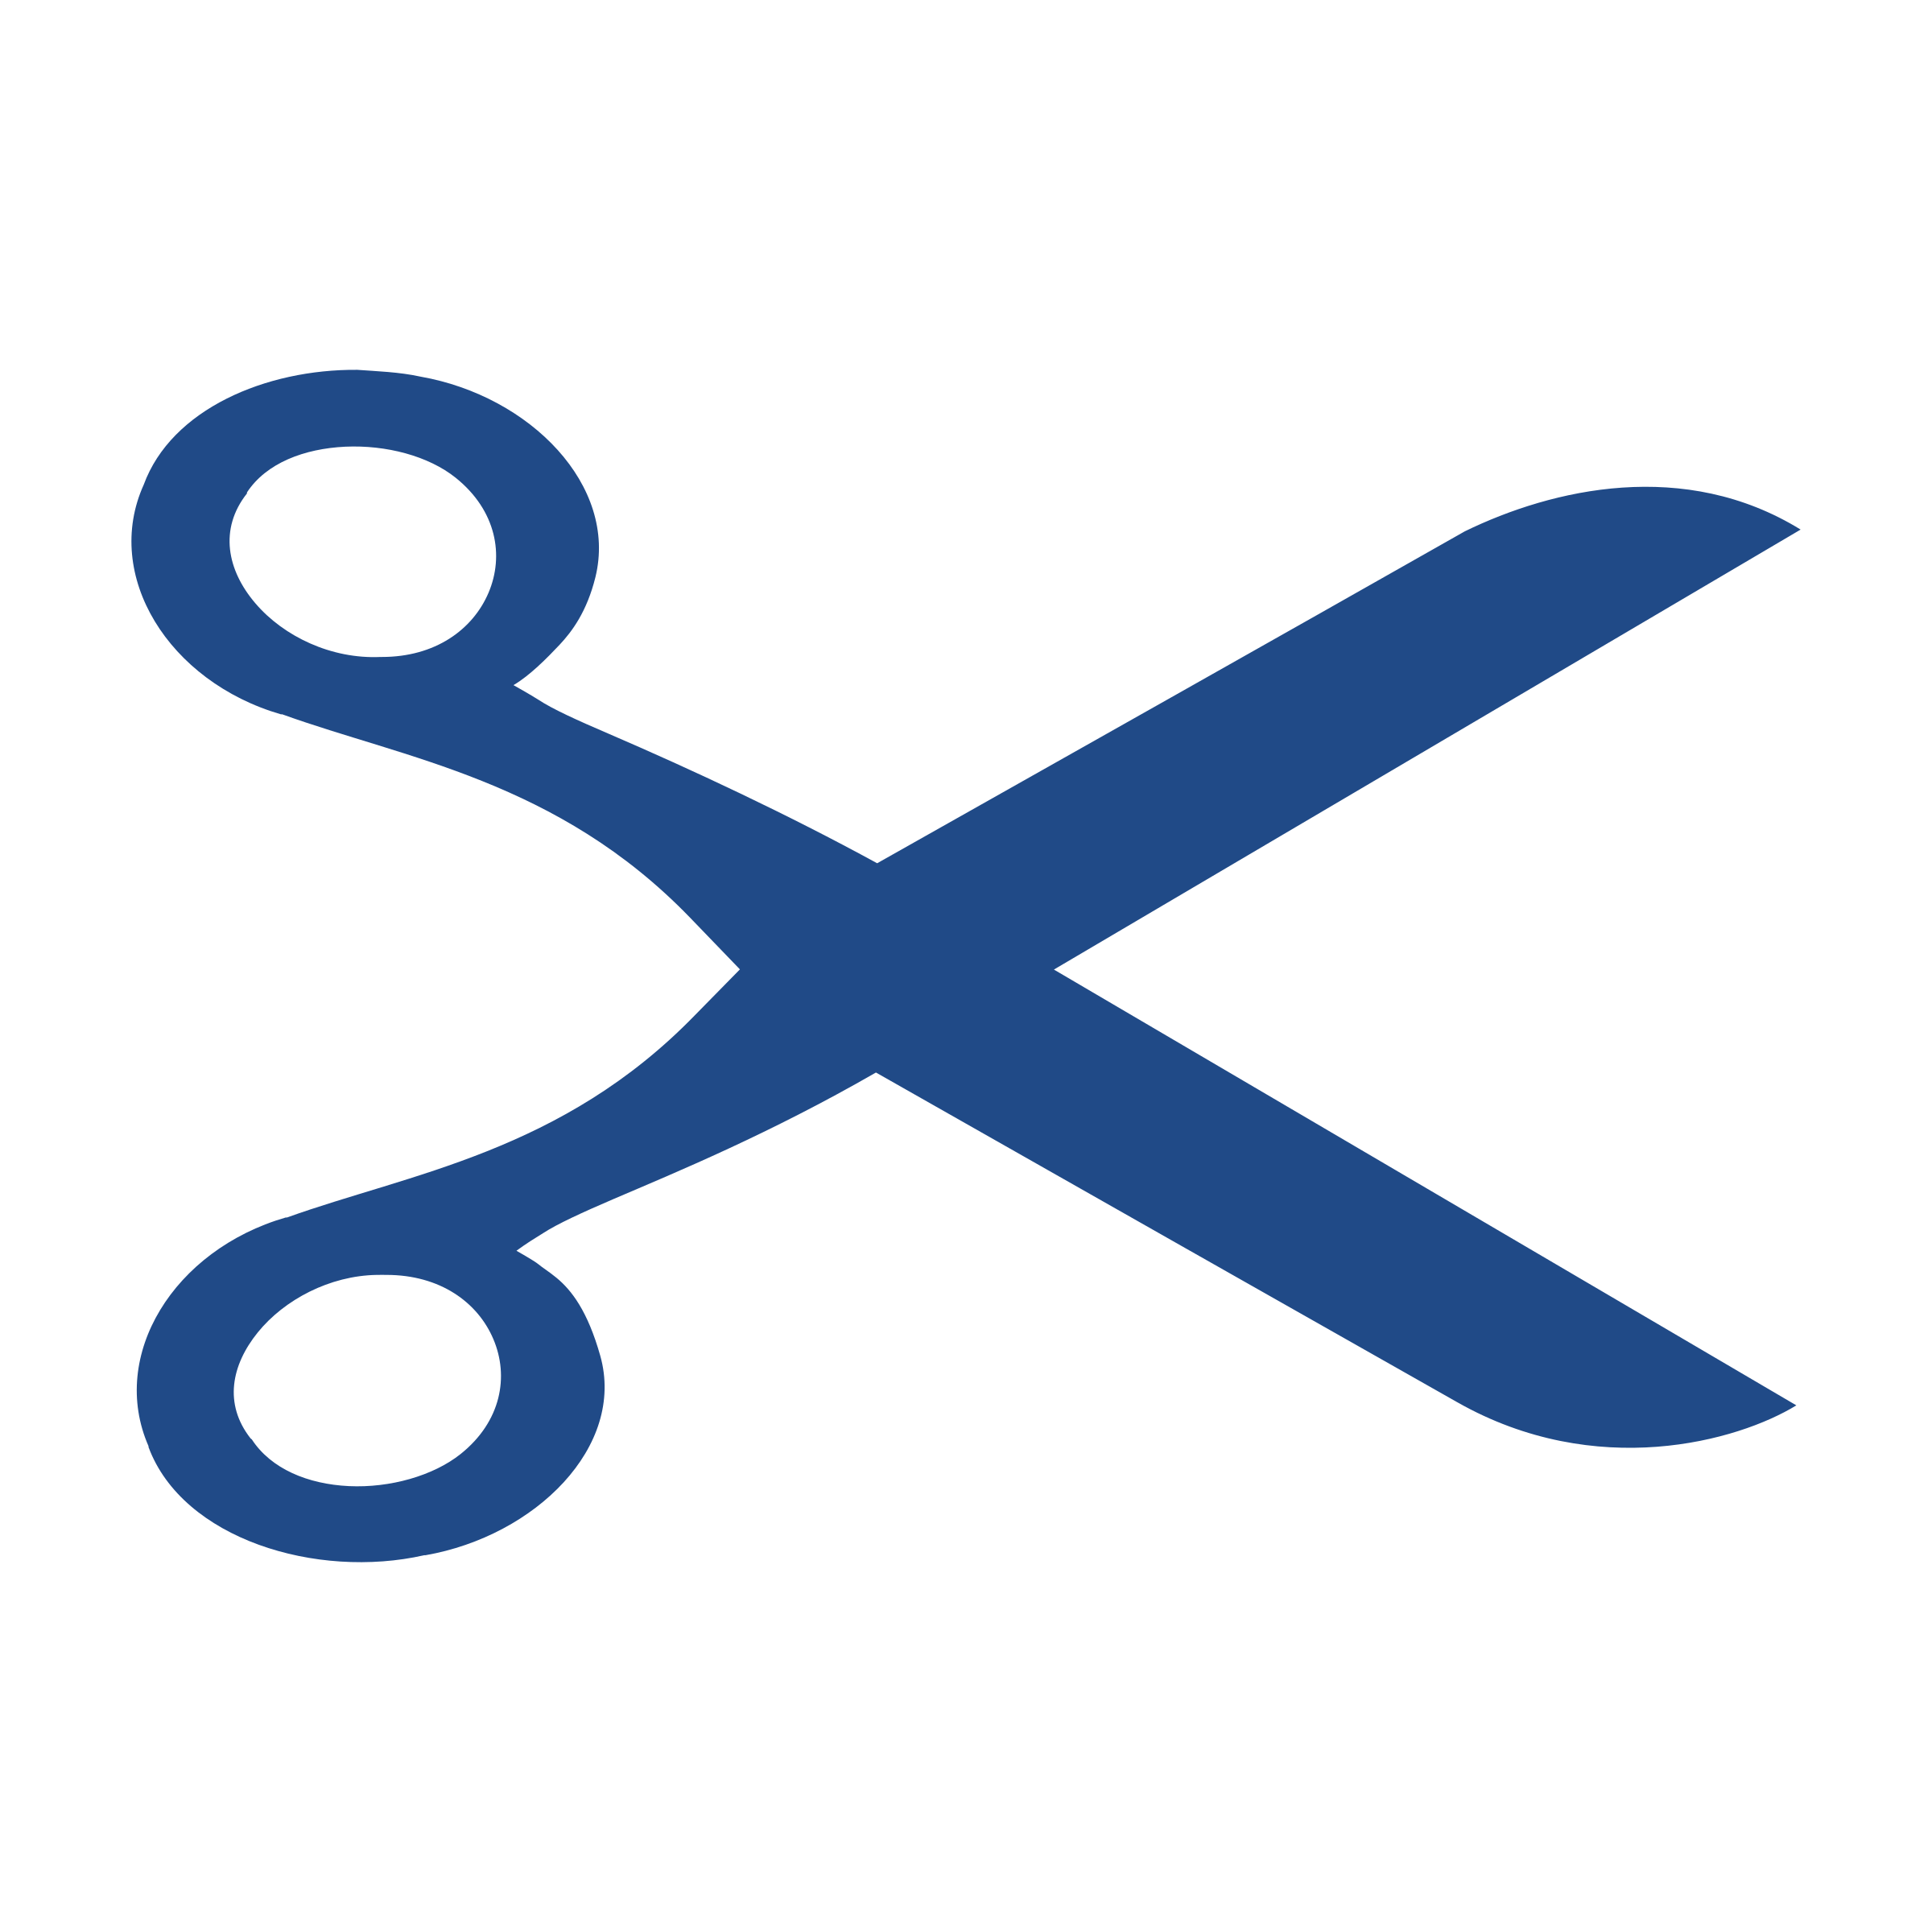 Clipart openclipart scissors logo in blue